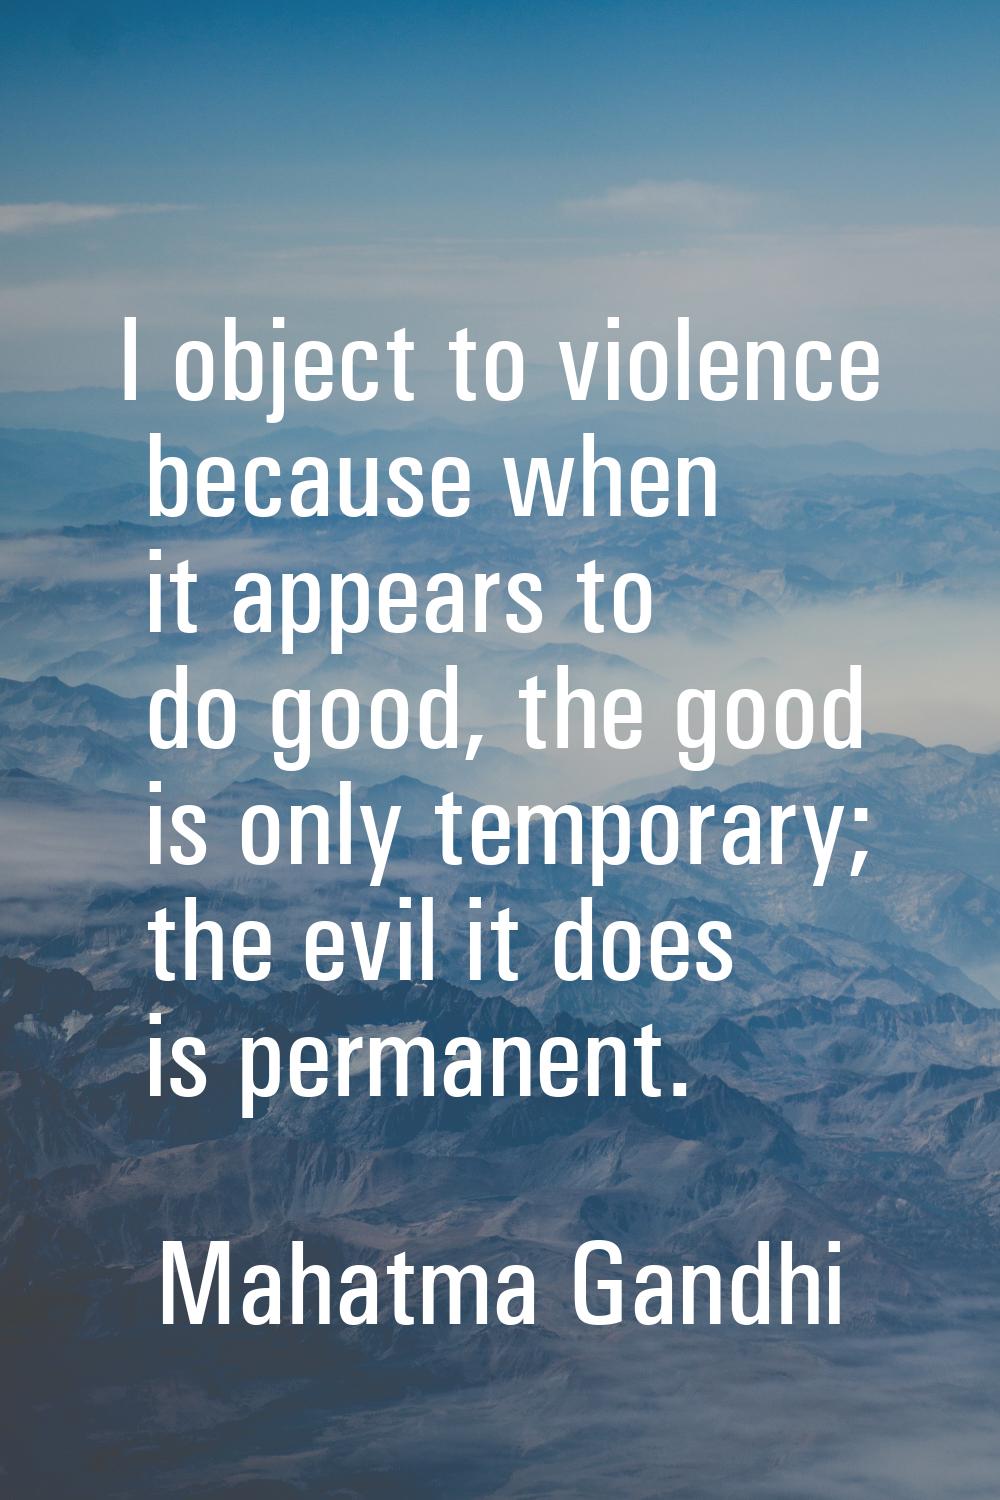 I object to violence because when it appears to do good, the good is only temporary; the evil it do